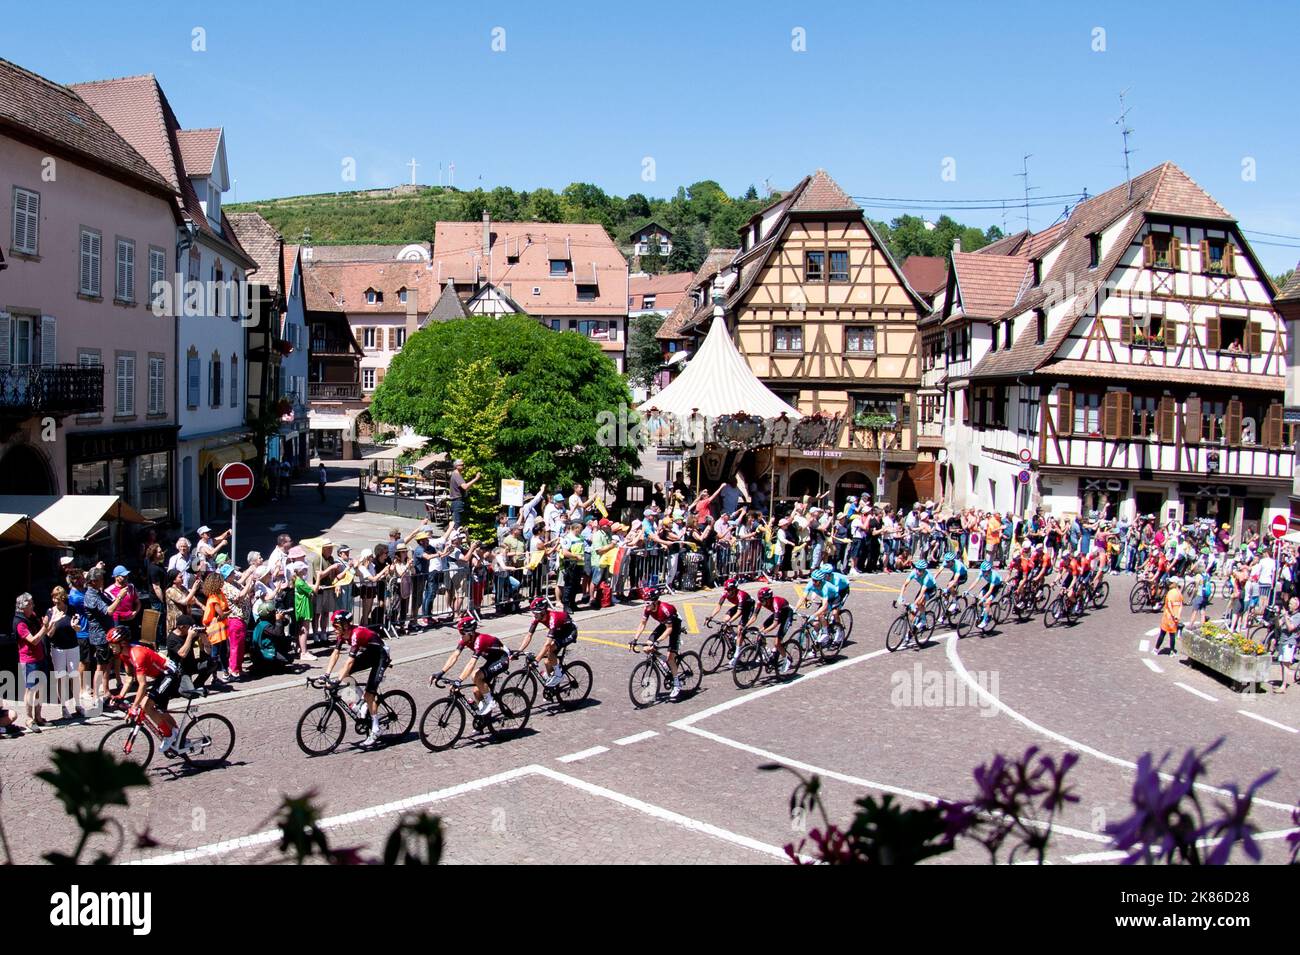 The chasing peloton including Team  Ineos's Geraint Thomas, Egan Bernal, Luke Rowe, Jonathan Castroviejo, Dylan Van Baarle, and Michal Kwiatowski, Gianni Moscon ride through the pretty town of  Rosheim during the Tour de France 2019 Stage 5 - Saint-Die-Des-Vosges to Colmar Stock Photo